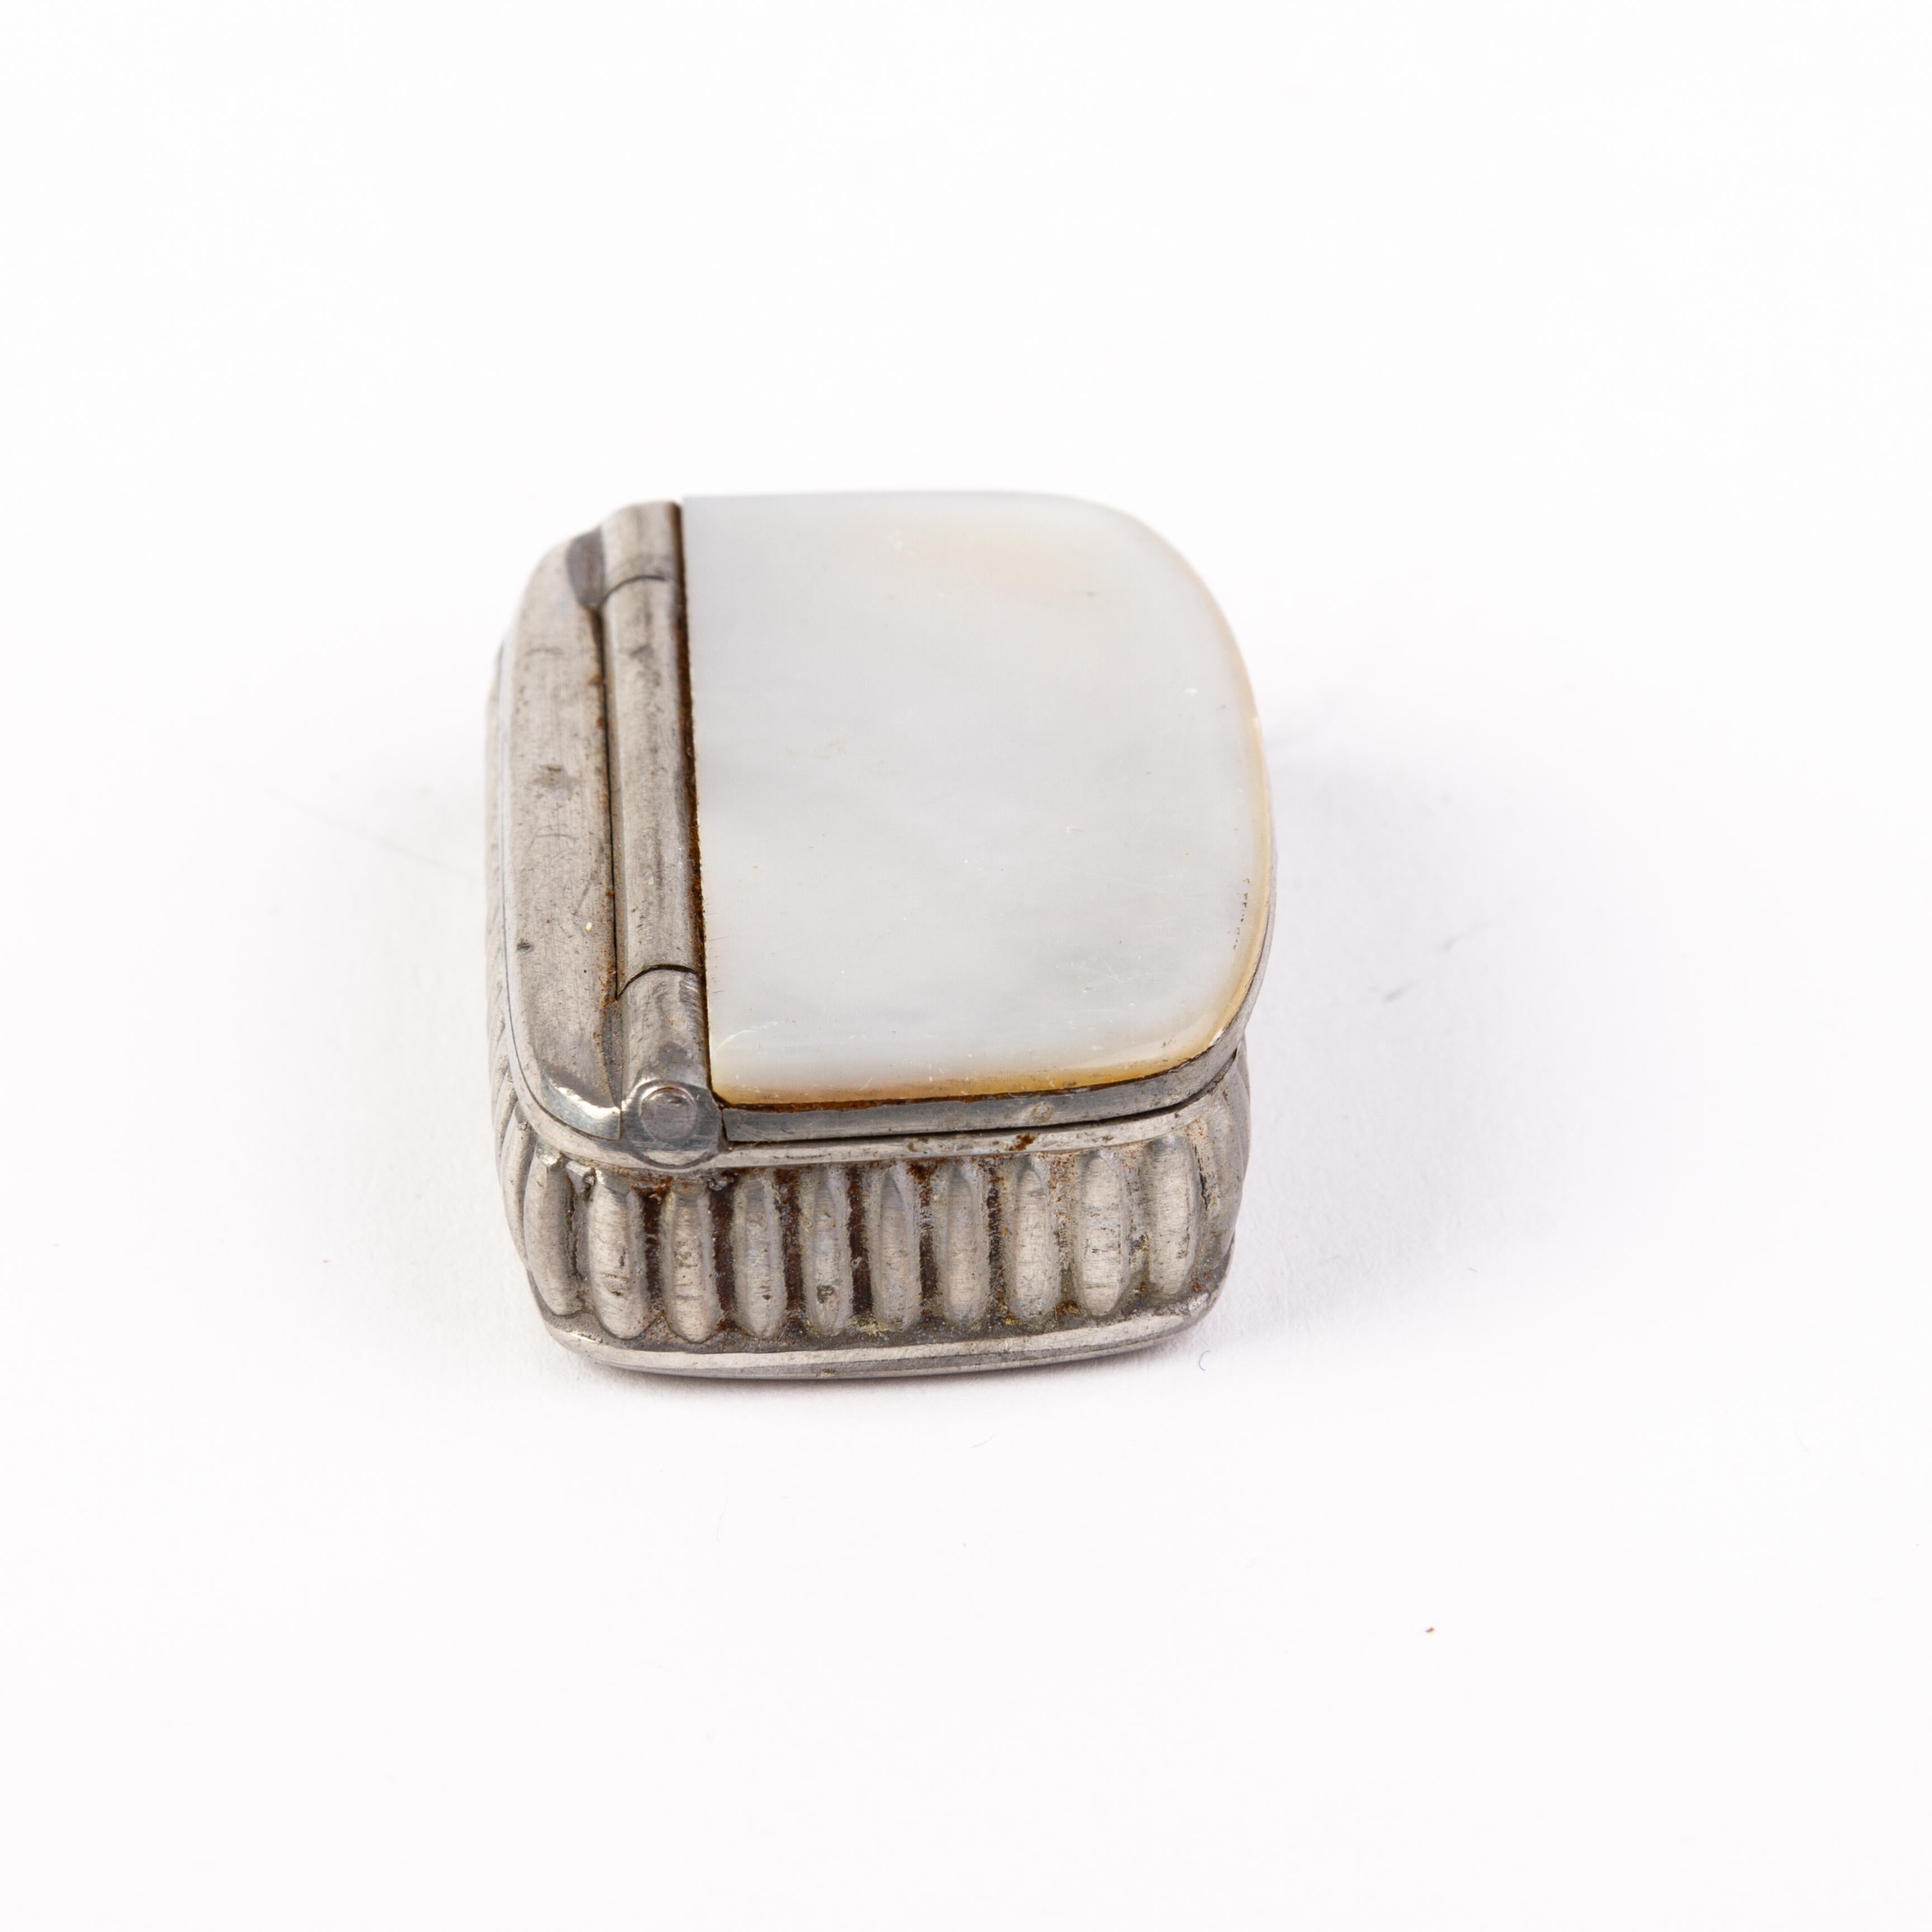 In good condition
From a private collection
Free international shipping
Mother of Pearl Snuffbox Vesta Case